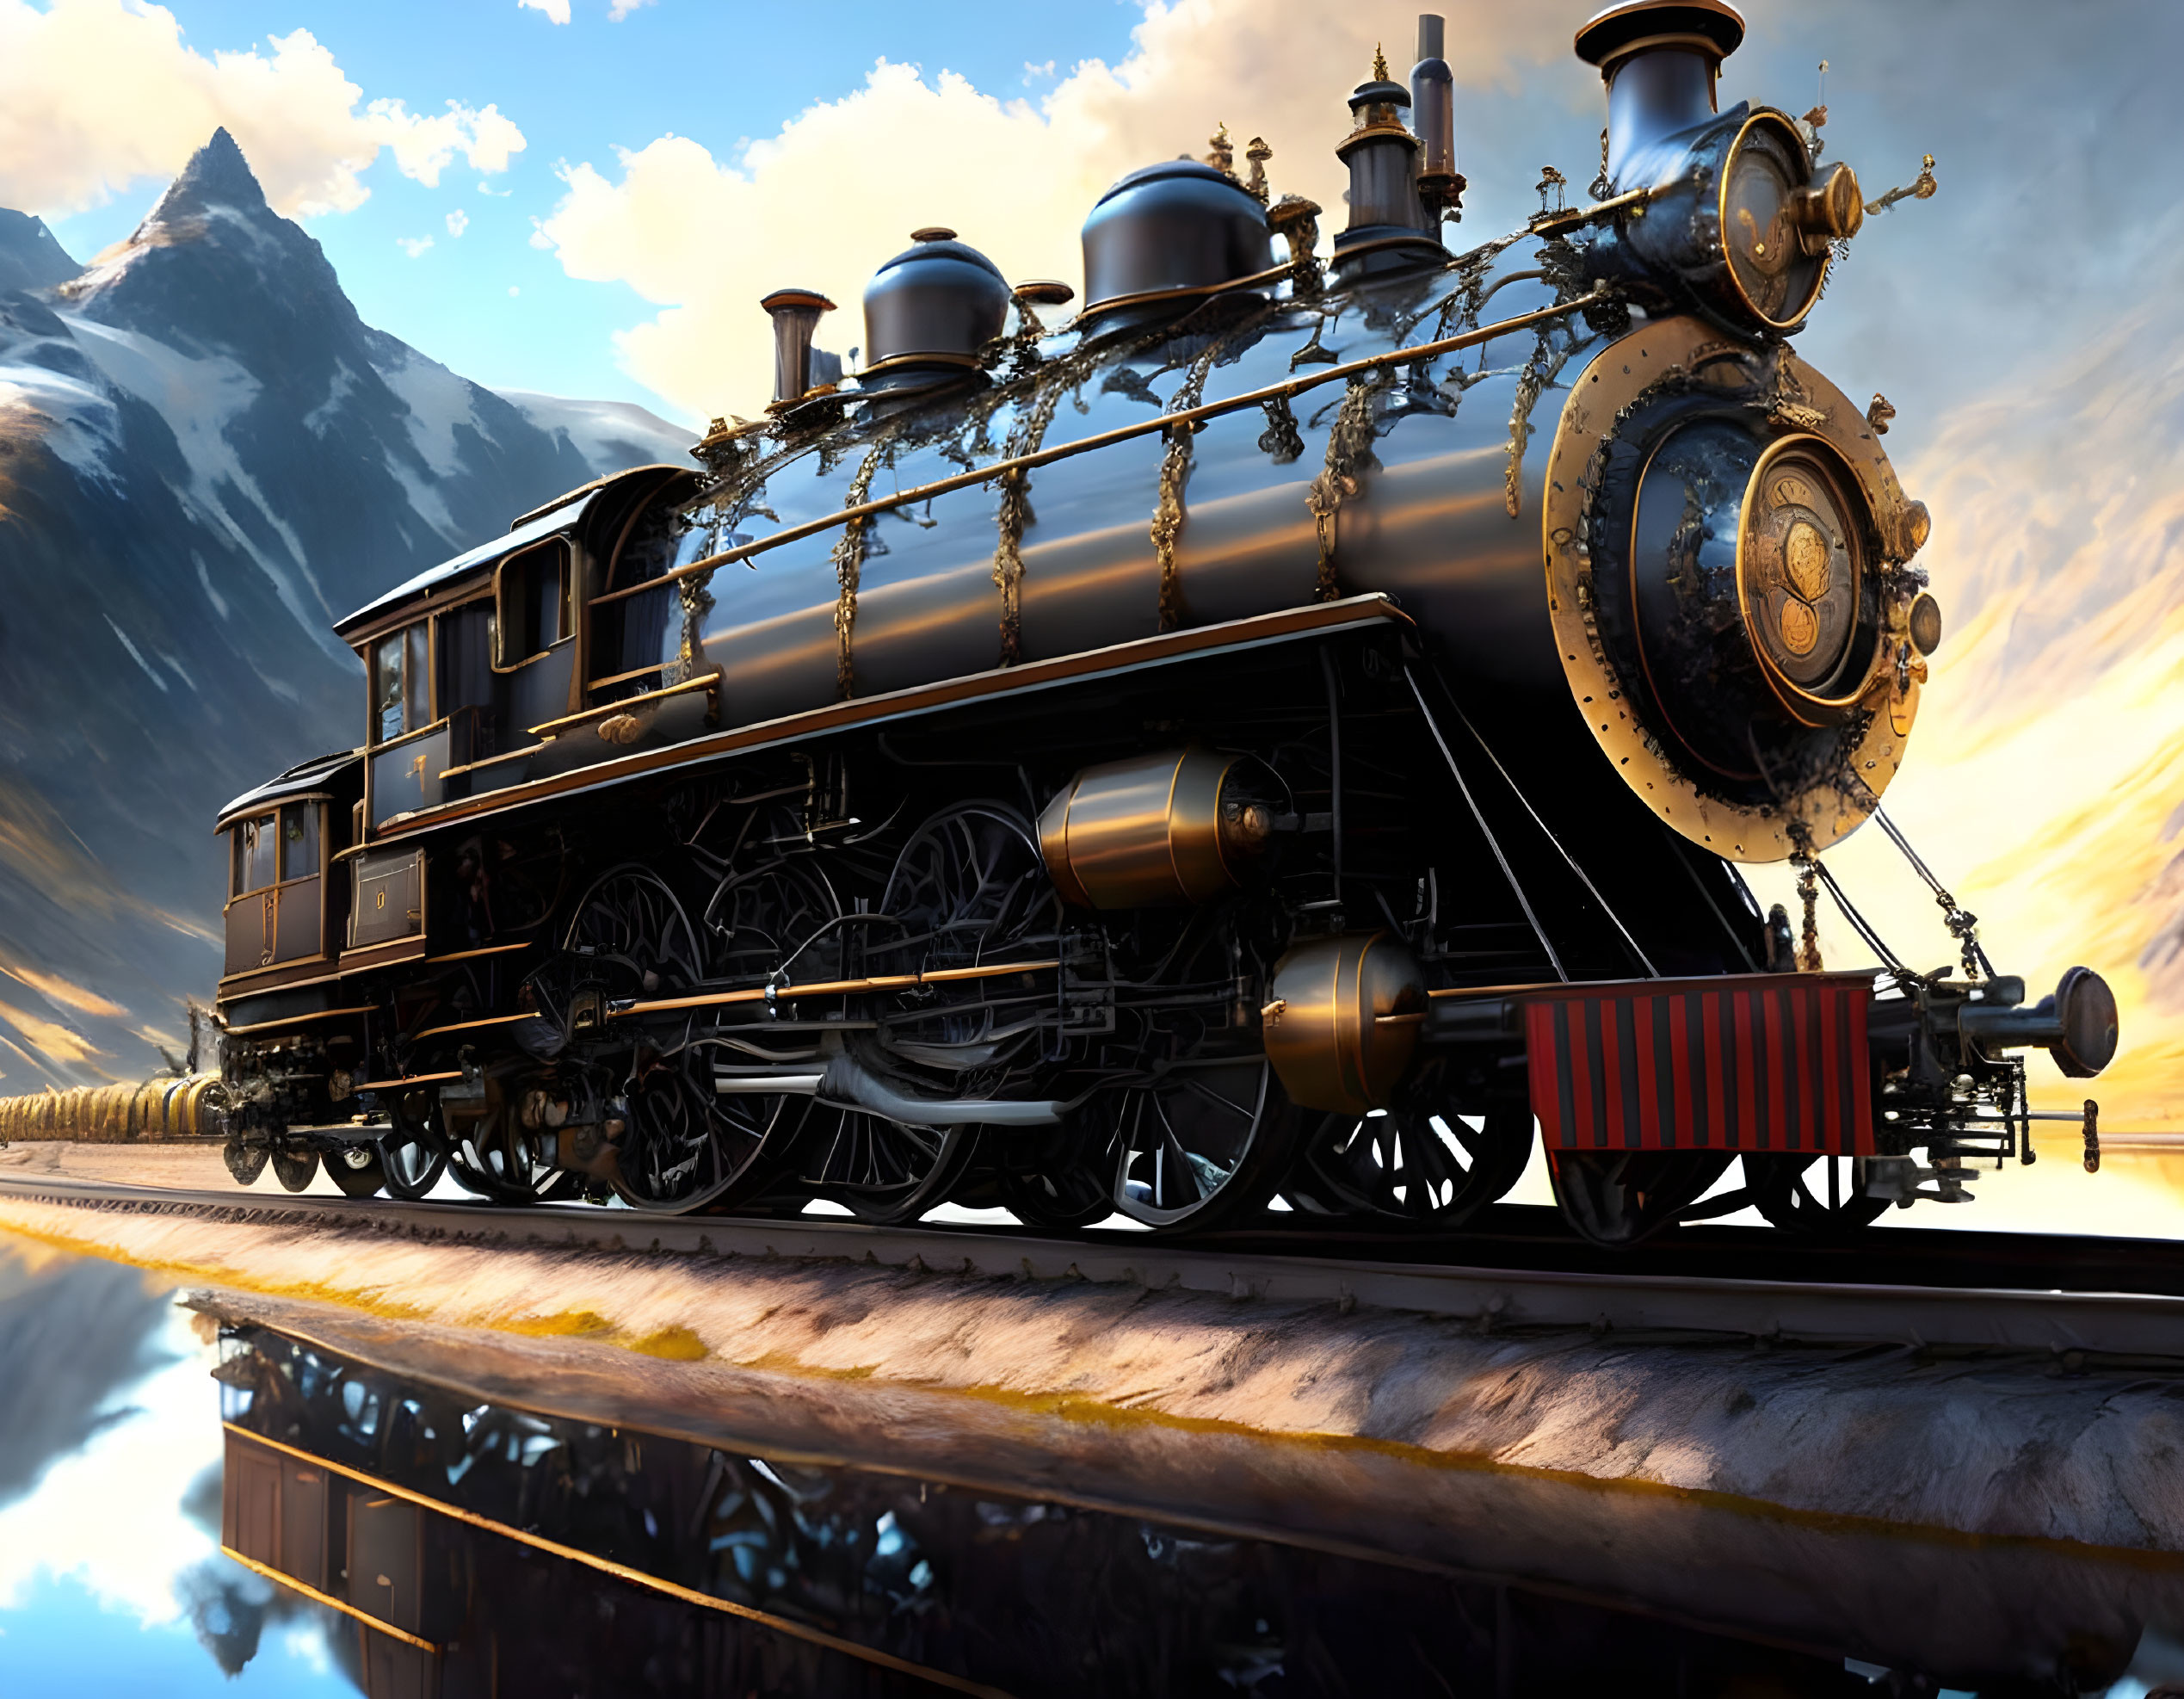 Detailed Close-Up of Vintage Steam Locomotive on Tracks with Majestic Mountains and Dramatic Sky